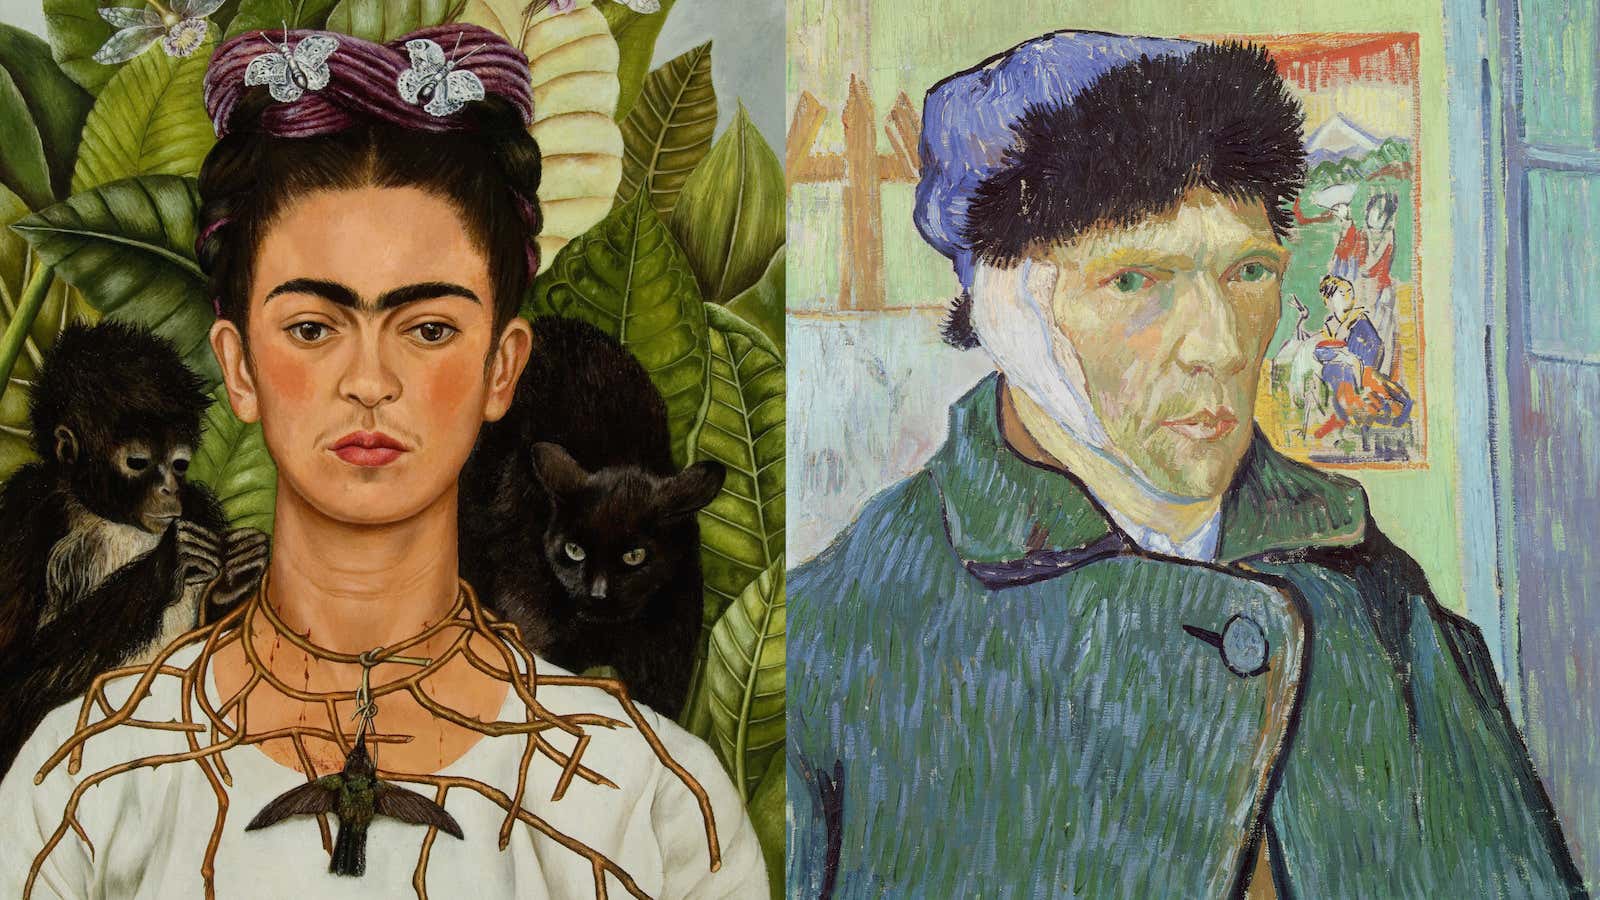 The original selfies: Frida Kahlo’s “Self-Portrait with Thorn Necklace and Hummingbird” (1940) and Van Gogh’s “Self-Portrait with Bandaged Ear” (1887–88).